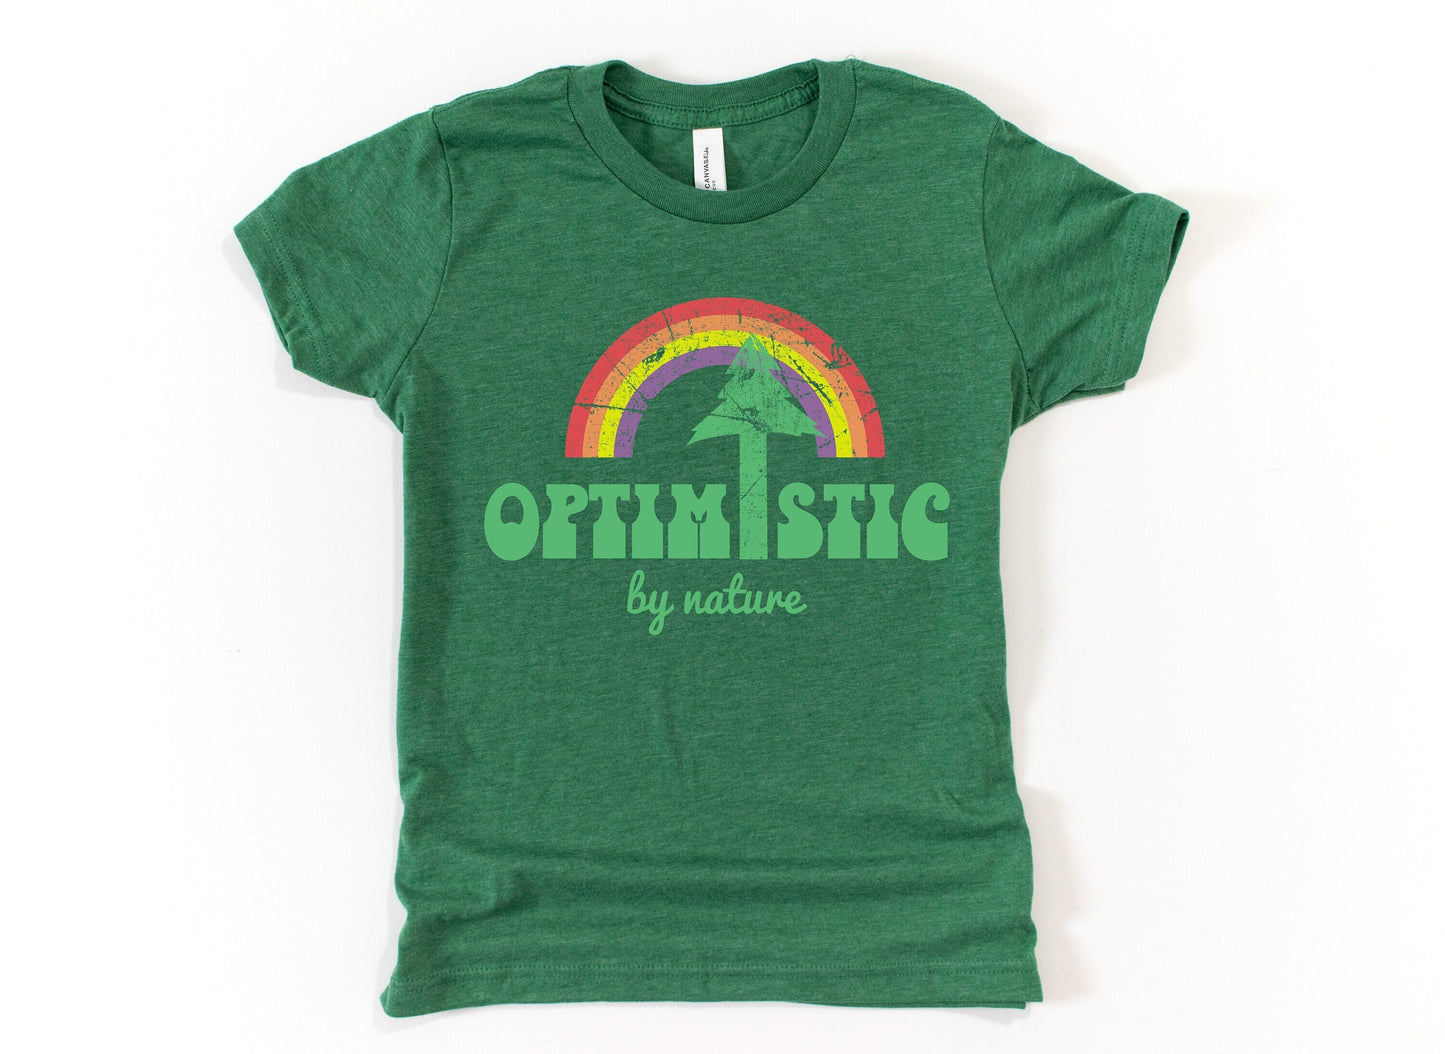 Optimistic By Nature Rainbow Pine Tree Earth Day Retro Boho Hippie Style Ultra Soft Graphic Tee Unisex Soft Tee T-shirt for Women or Men